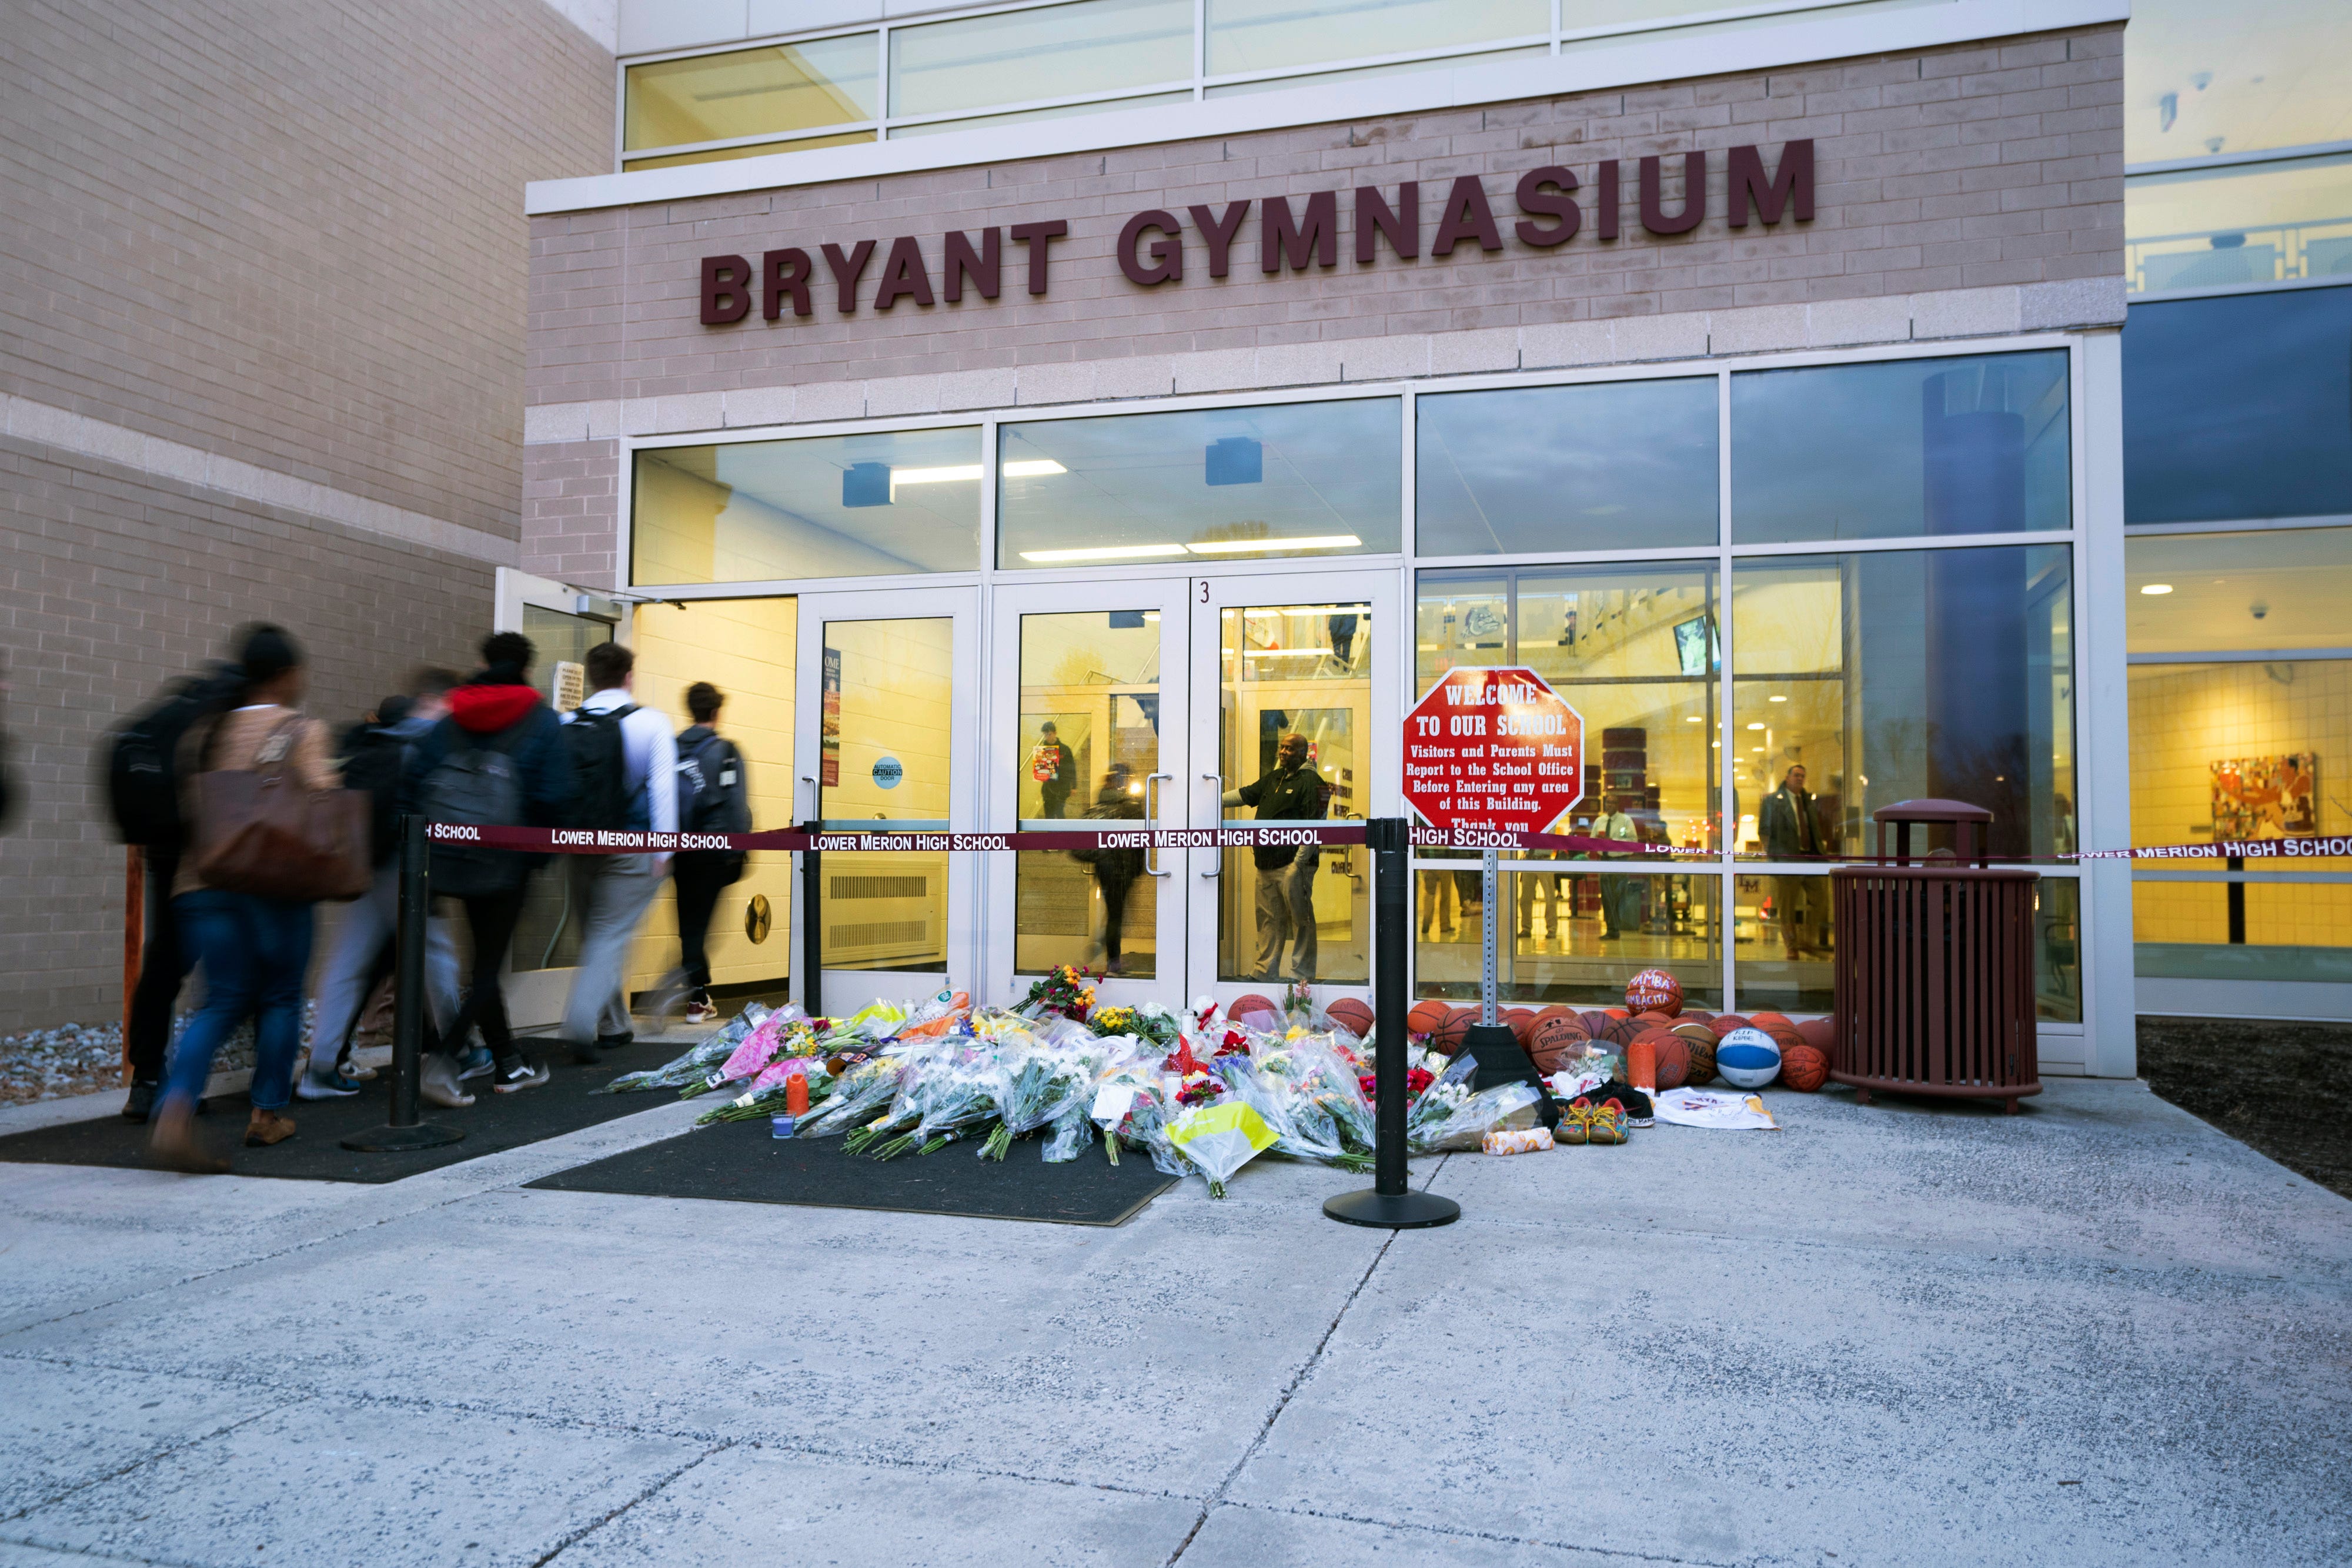 Students walk past the flowers, jerseys and imagery that were left in remembrance to Kobe Bryant at a small memorial at the entrance of the Bryant Gymnasium at Lower Merion High School in Wynnewood, PA.